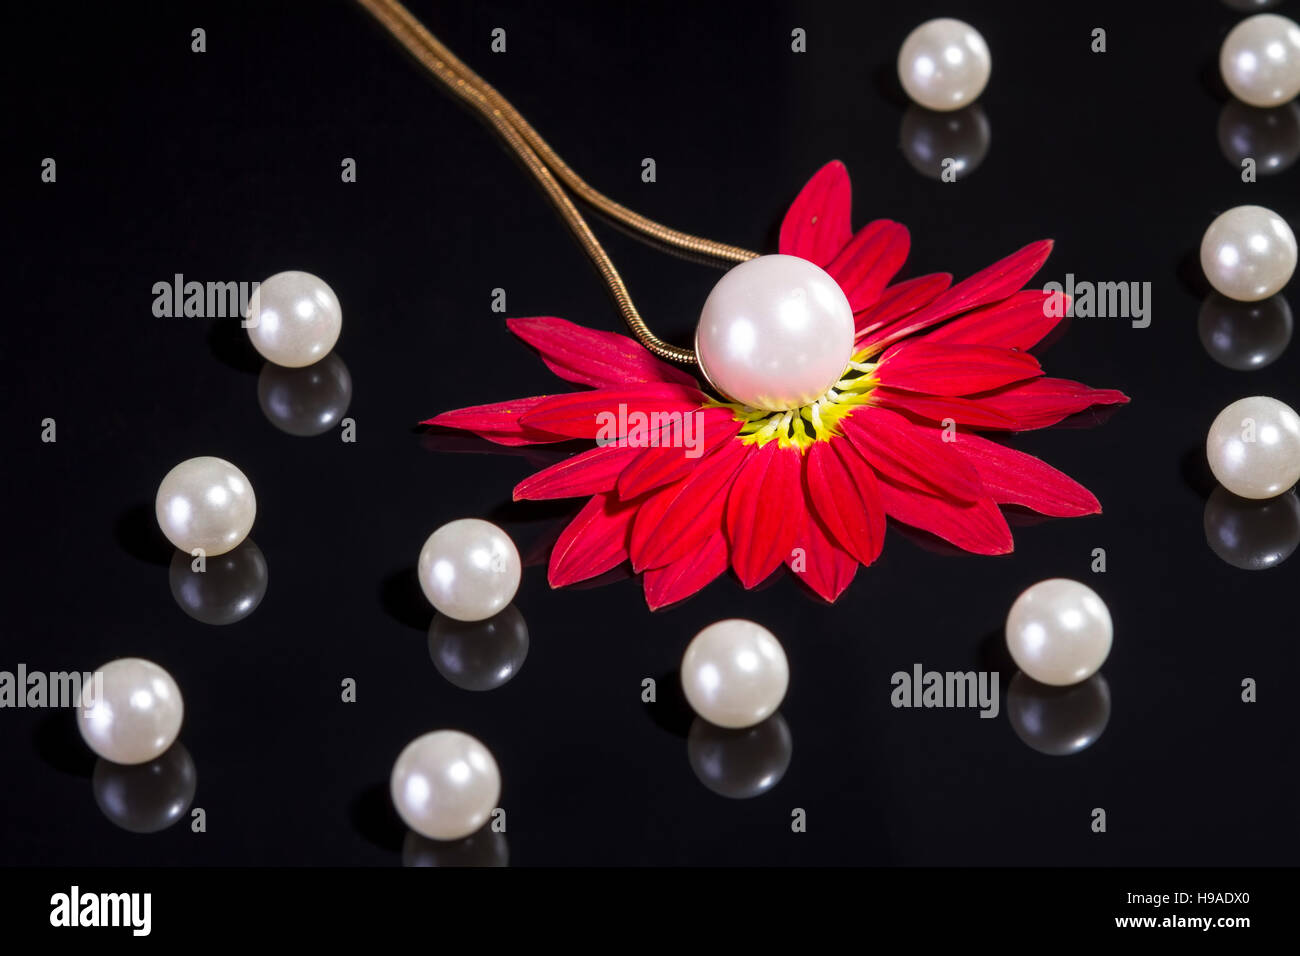 White pearls necklace on black background. Focus on the big pearl over red petals! Stock Photo